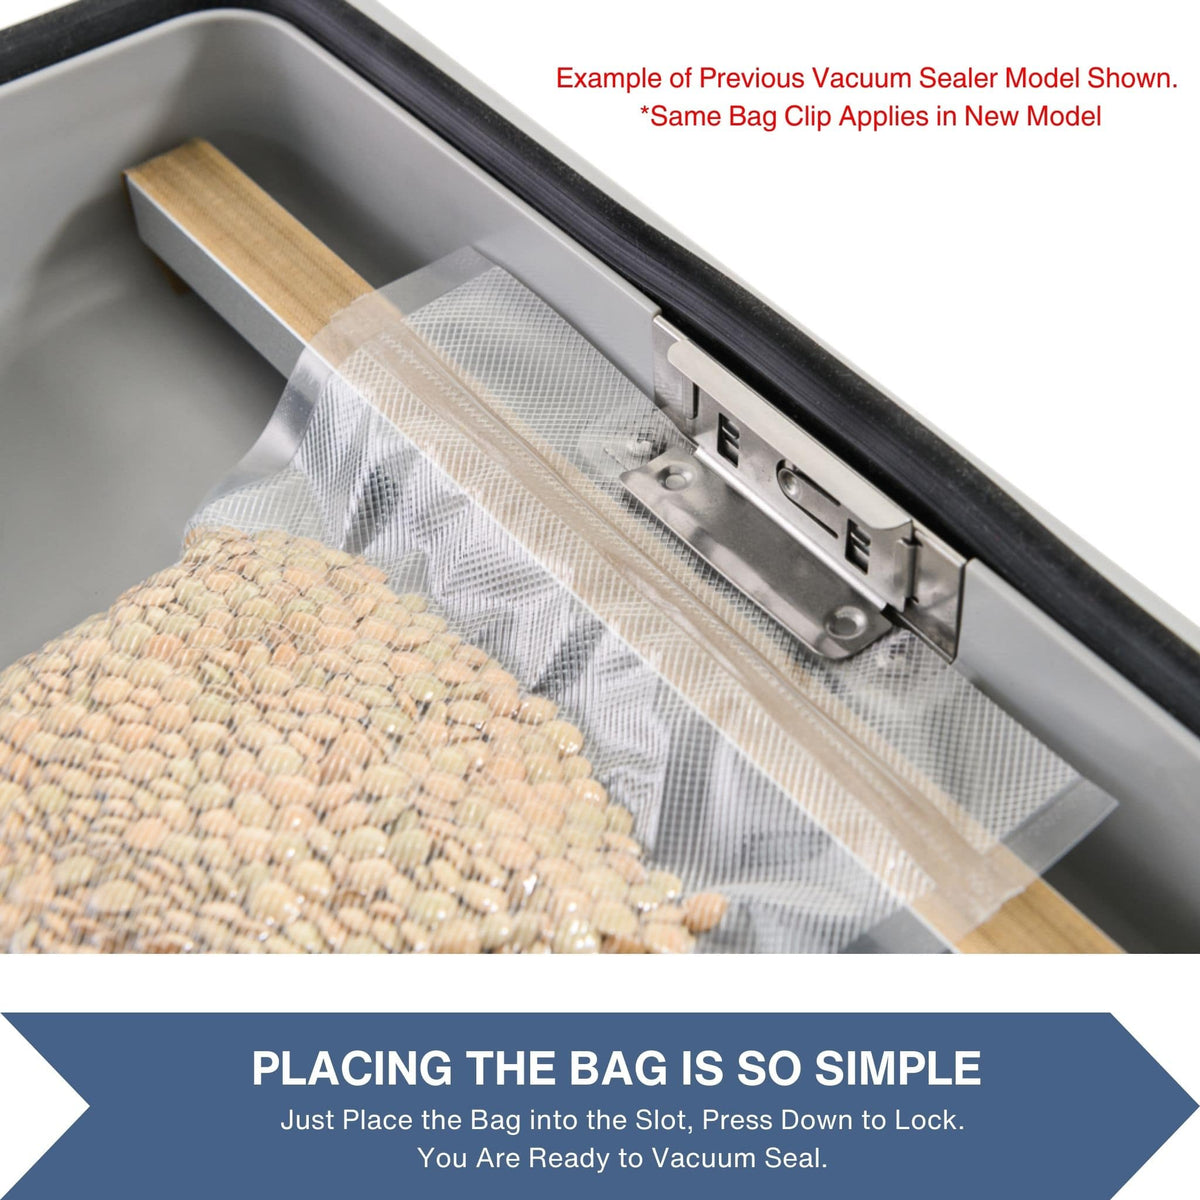 Pro-line VS-CHD2 vacuum chamber sealer cryovac machine show the vacuum chamber bag clip that holds the bag in place before vacuum sealing